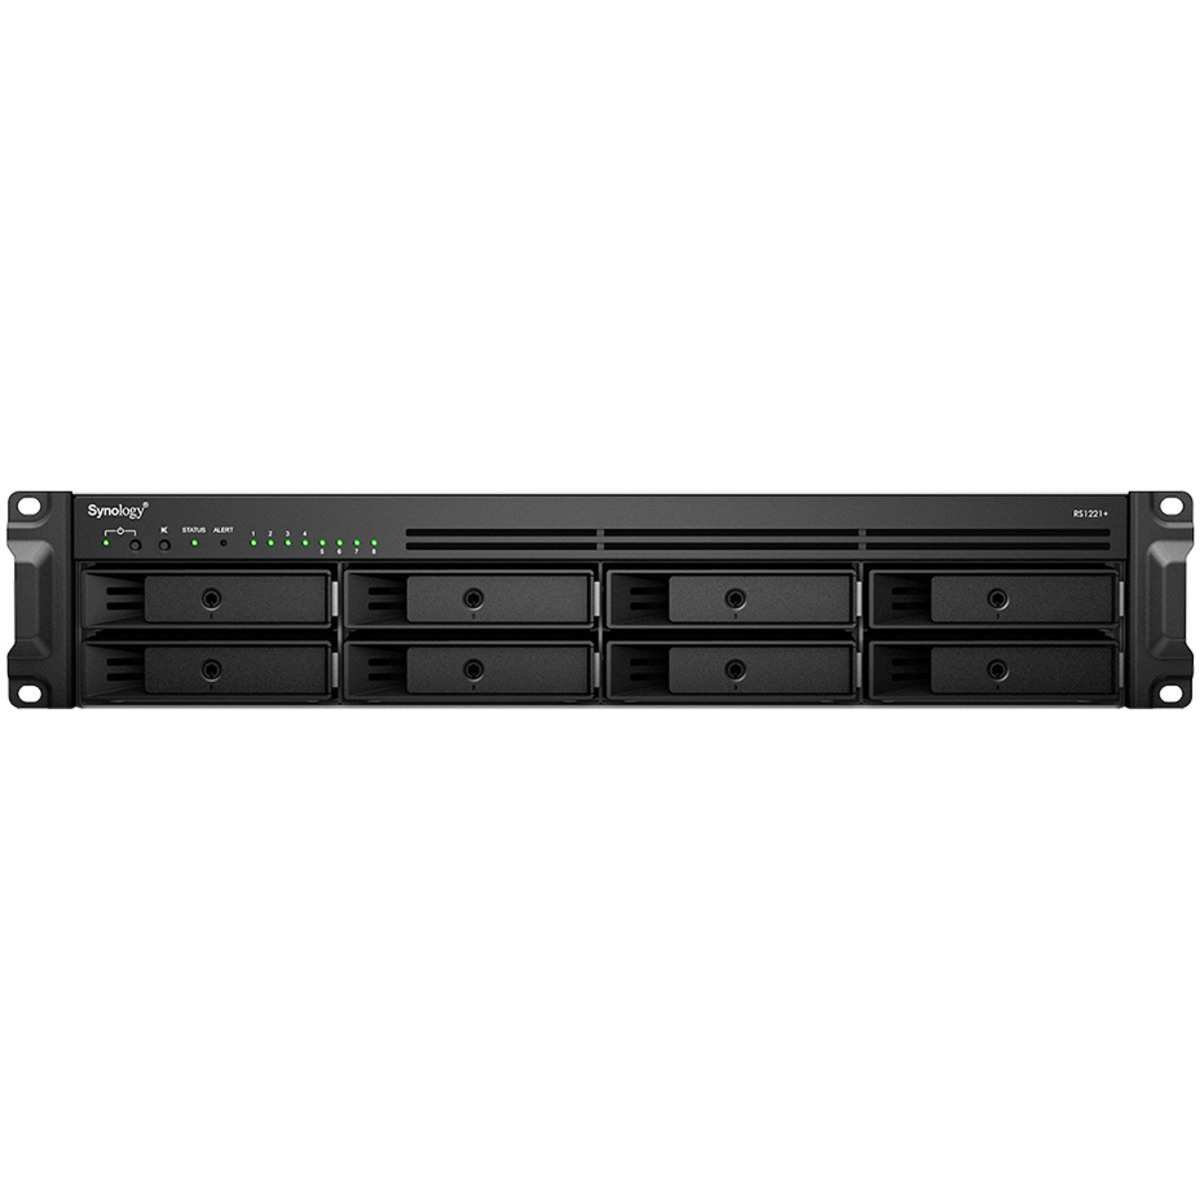 buy $5459 Synology RackStation RS1221+ 96tb RackMount NAS - Network Attached Storage Device 8x12000gb Seagate IronWolf Pro ST12000NE0008 3.5 7200rpm SATA 6Gb/s HDD NAS Class Drives Installed - Burn-In Tested - nas headquarters buy network attached storage server device das new raid-5 free shipping usa christmas new year holiday sale RackStation RS1221+